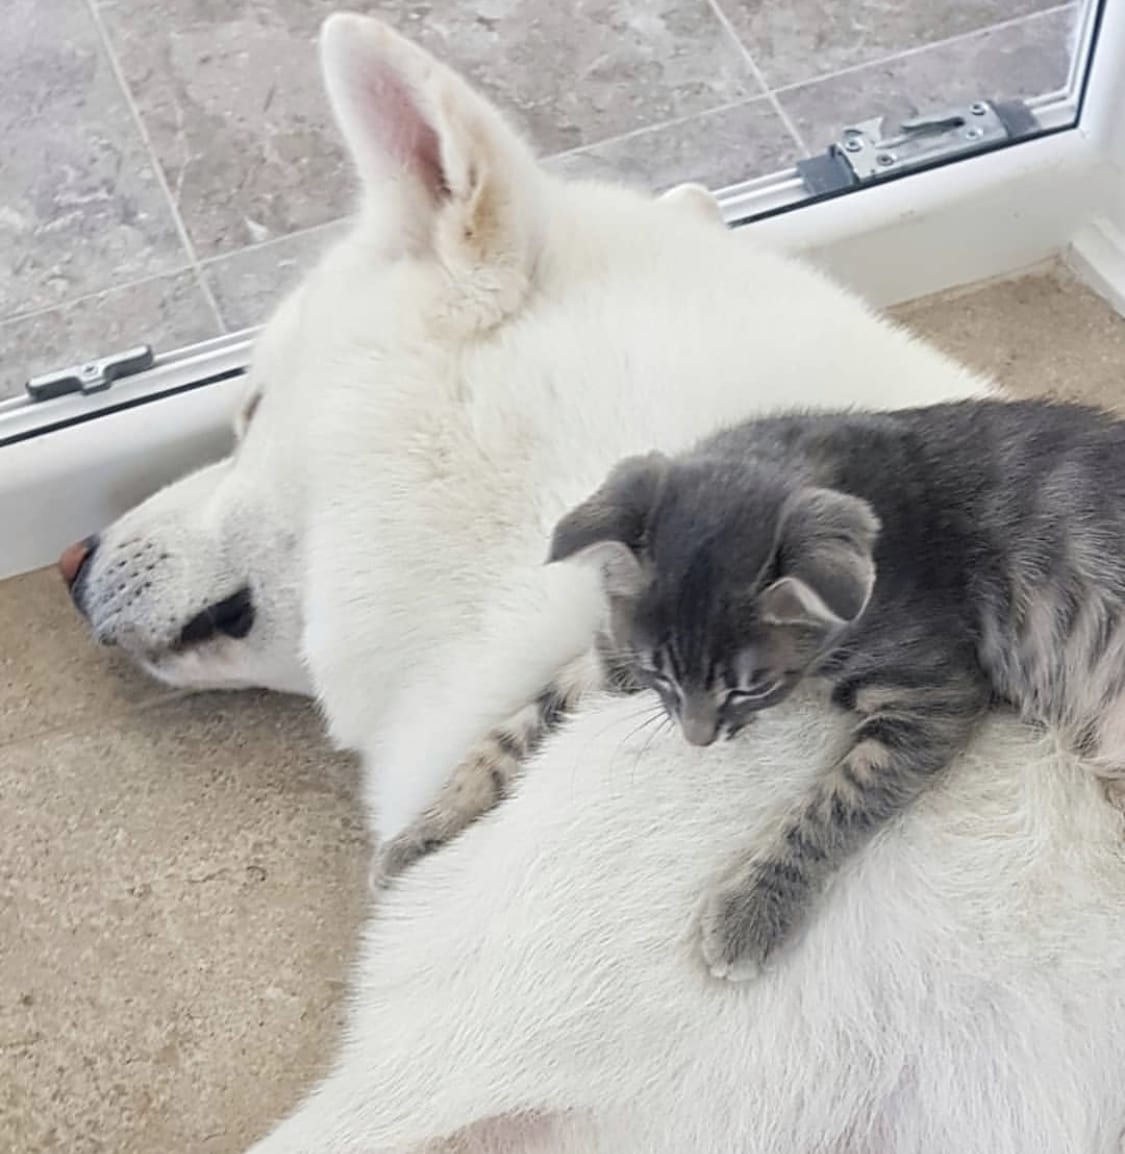 Akita sleeping on the carpet in the front door with a kitten lying on top of her